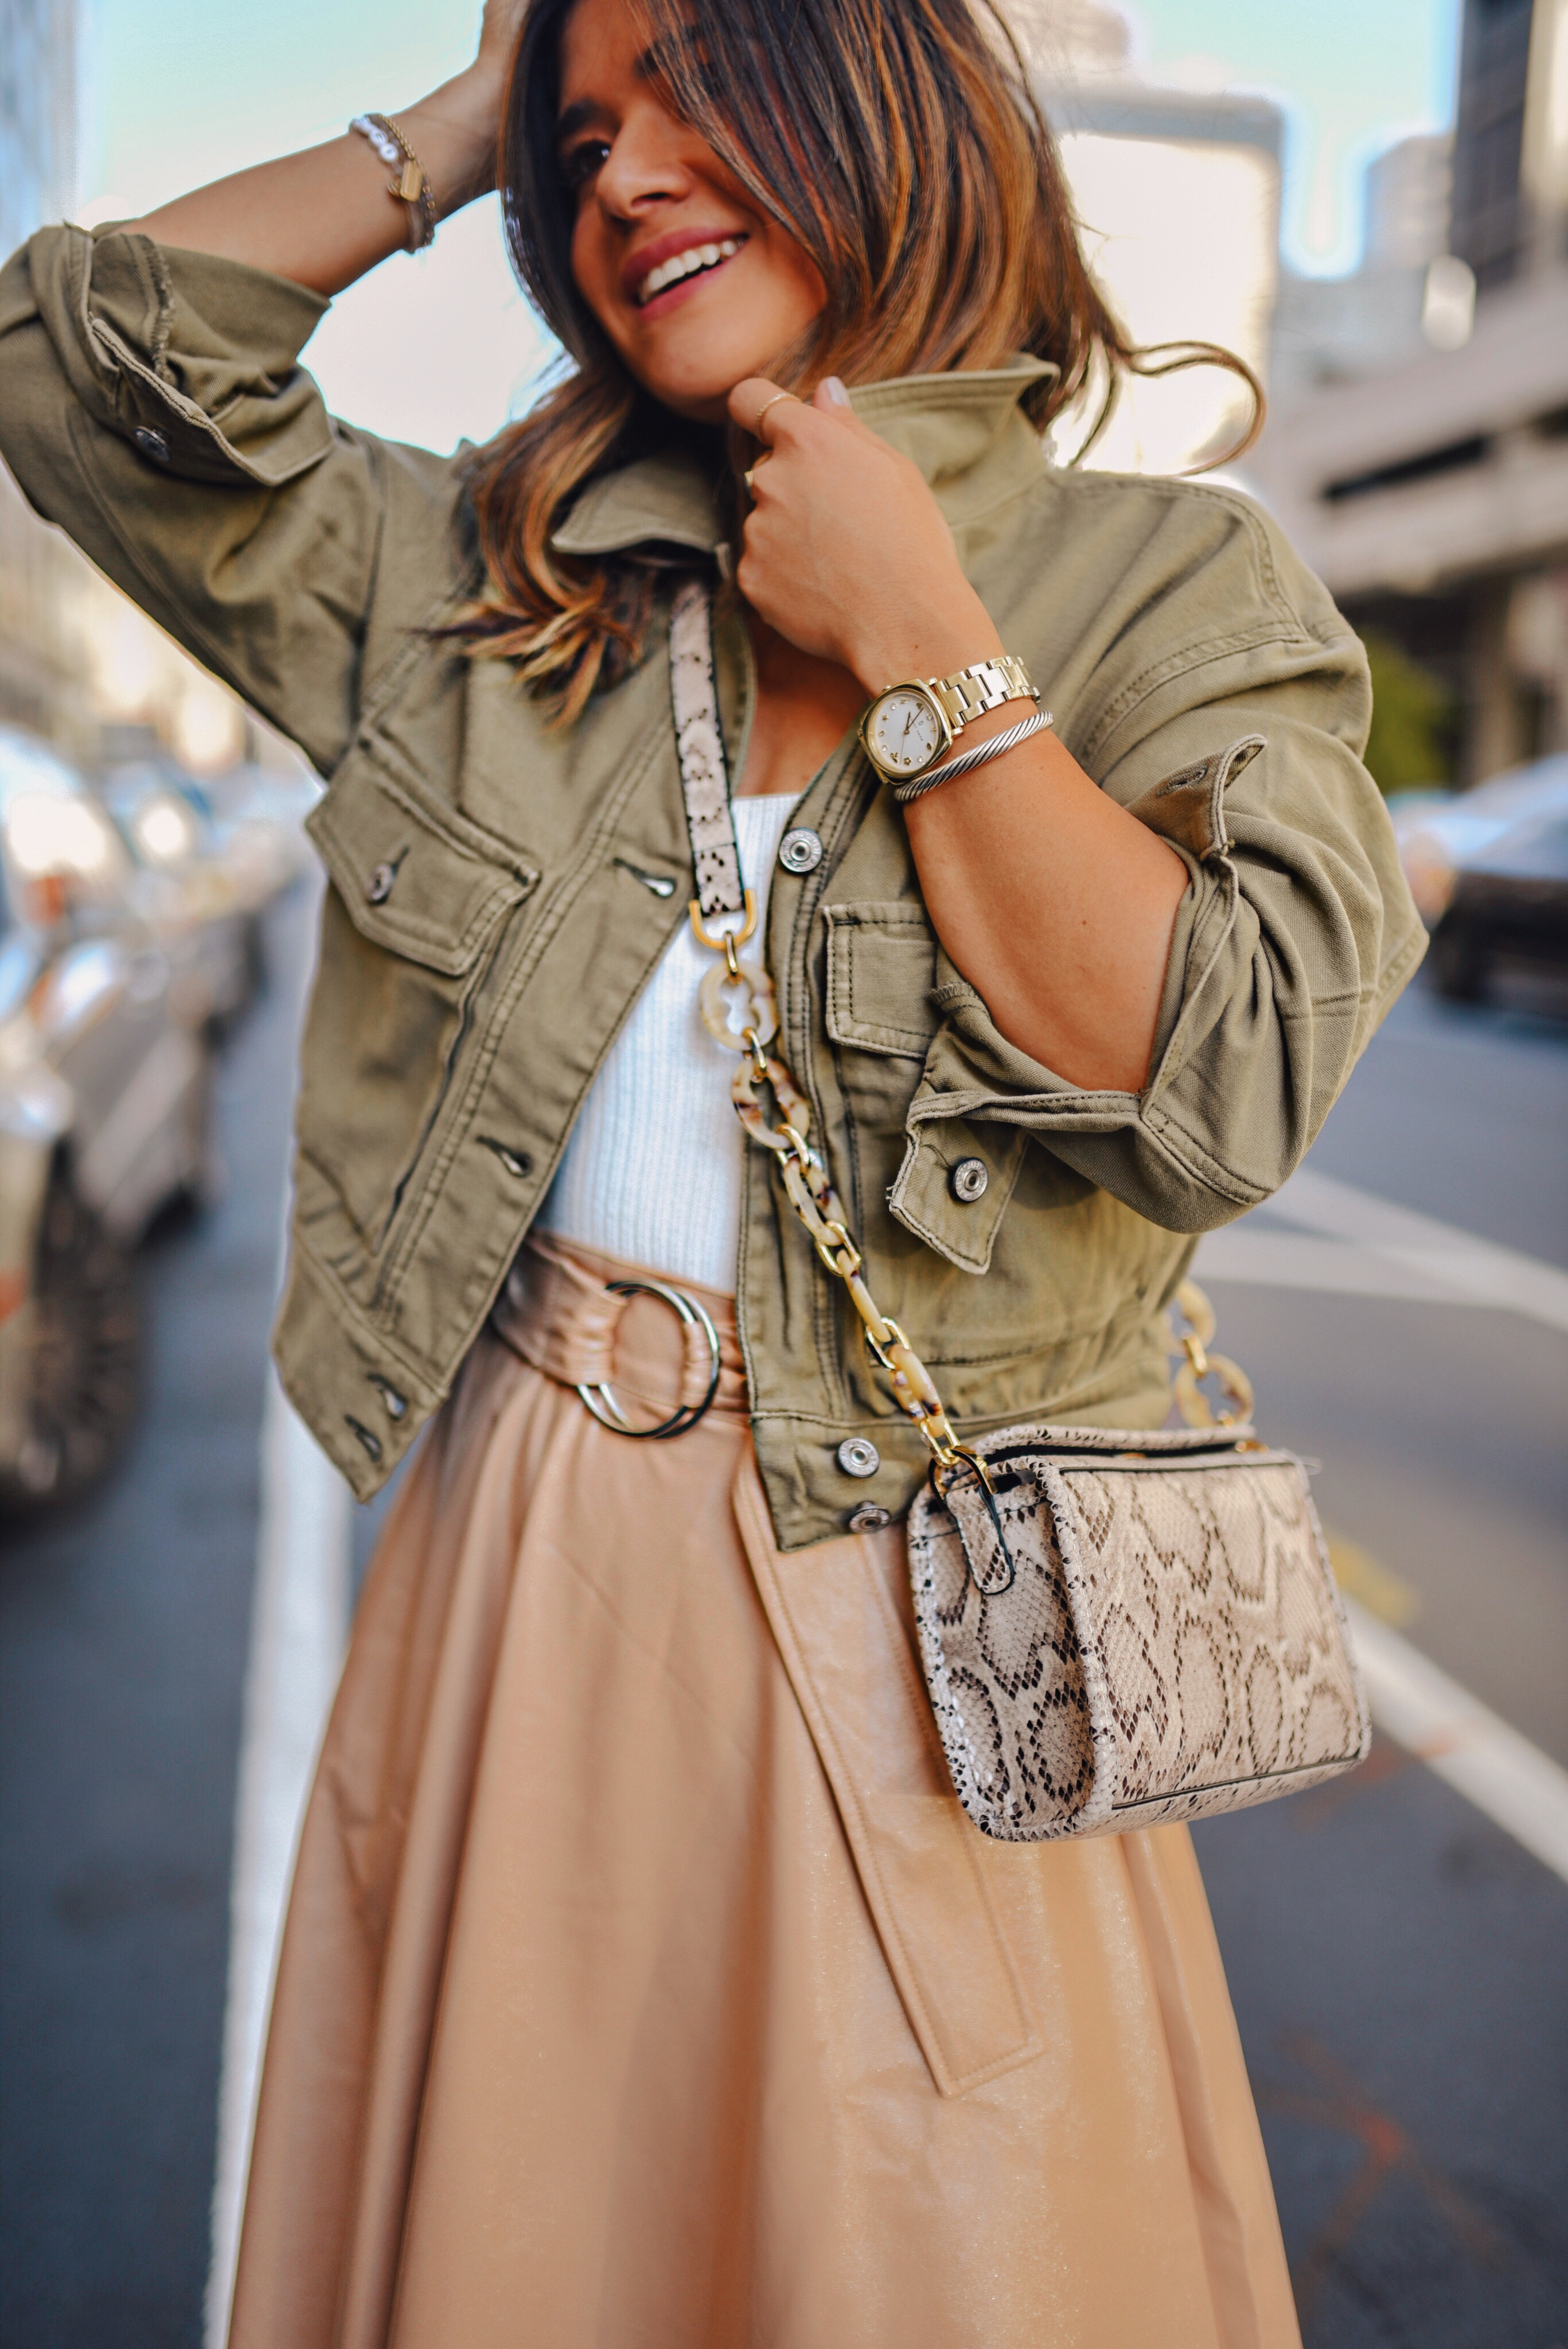 Carolina Hellal of Chic Talk wearing a Topshop white bodysuit, beige faux leather midi skirt, Abercrombie jacket, and Vici suede beige ankle boots. 